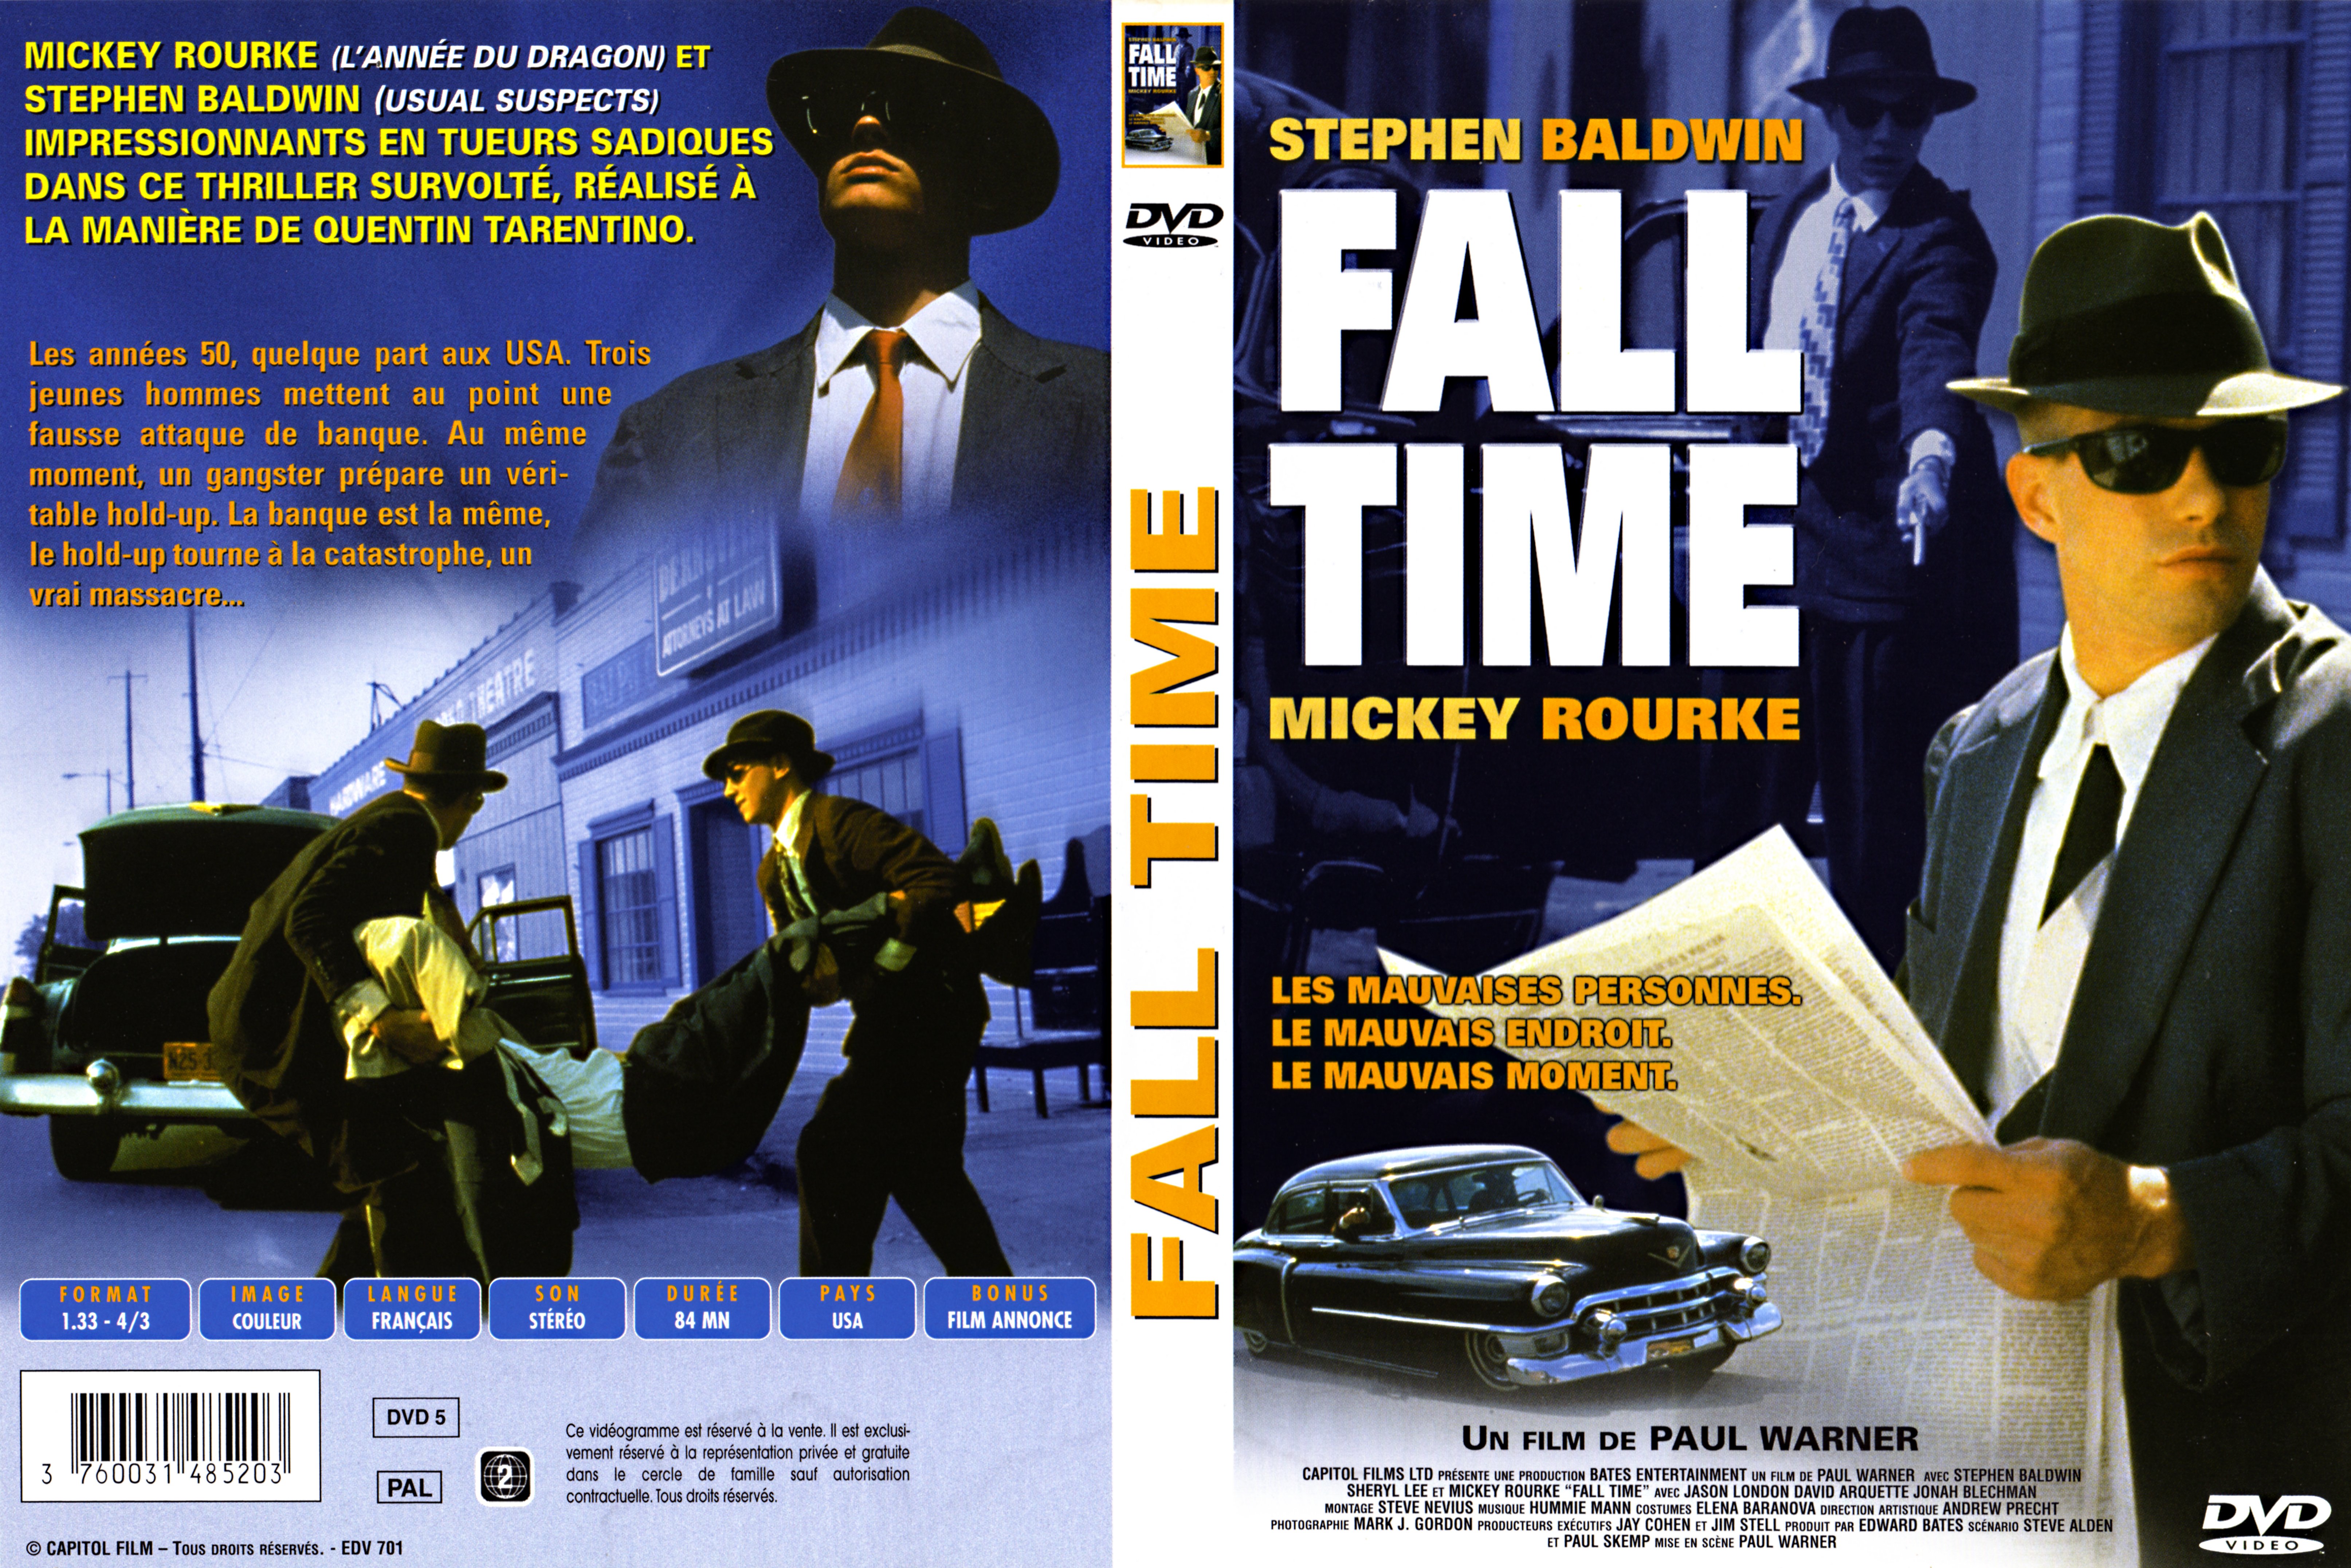 Jaquette DVD Fall time